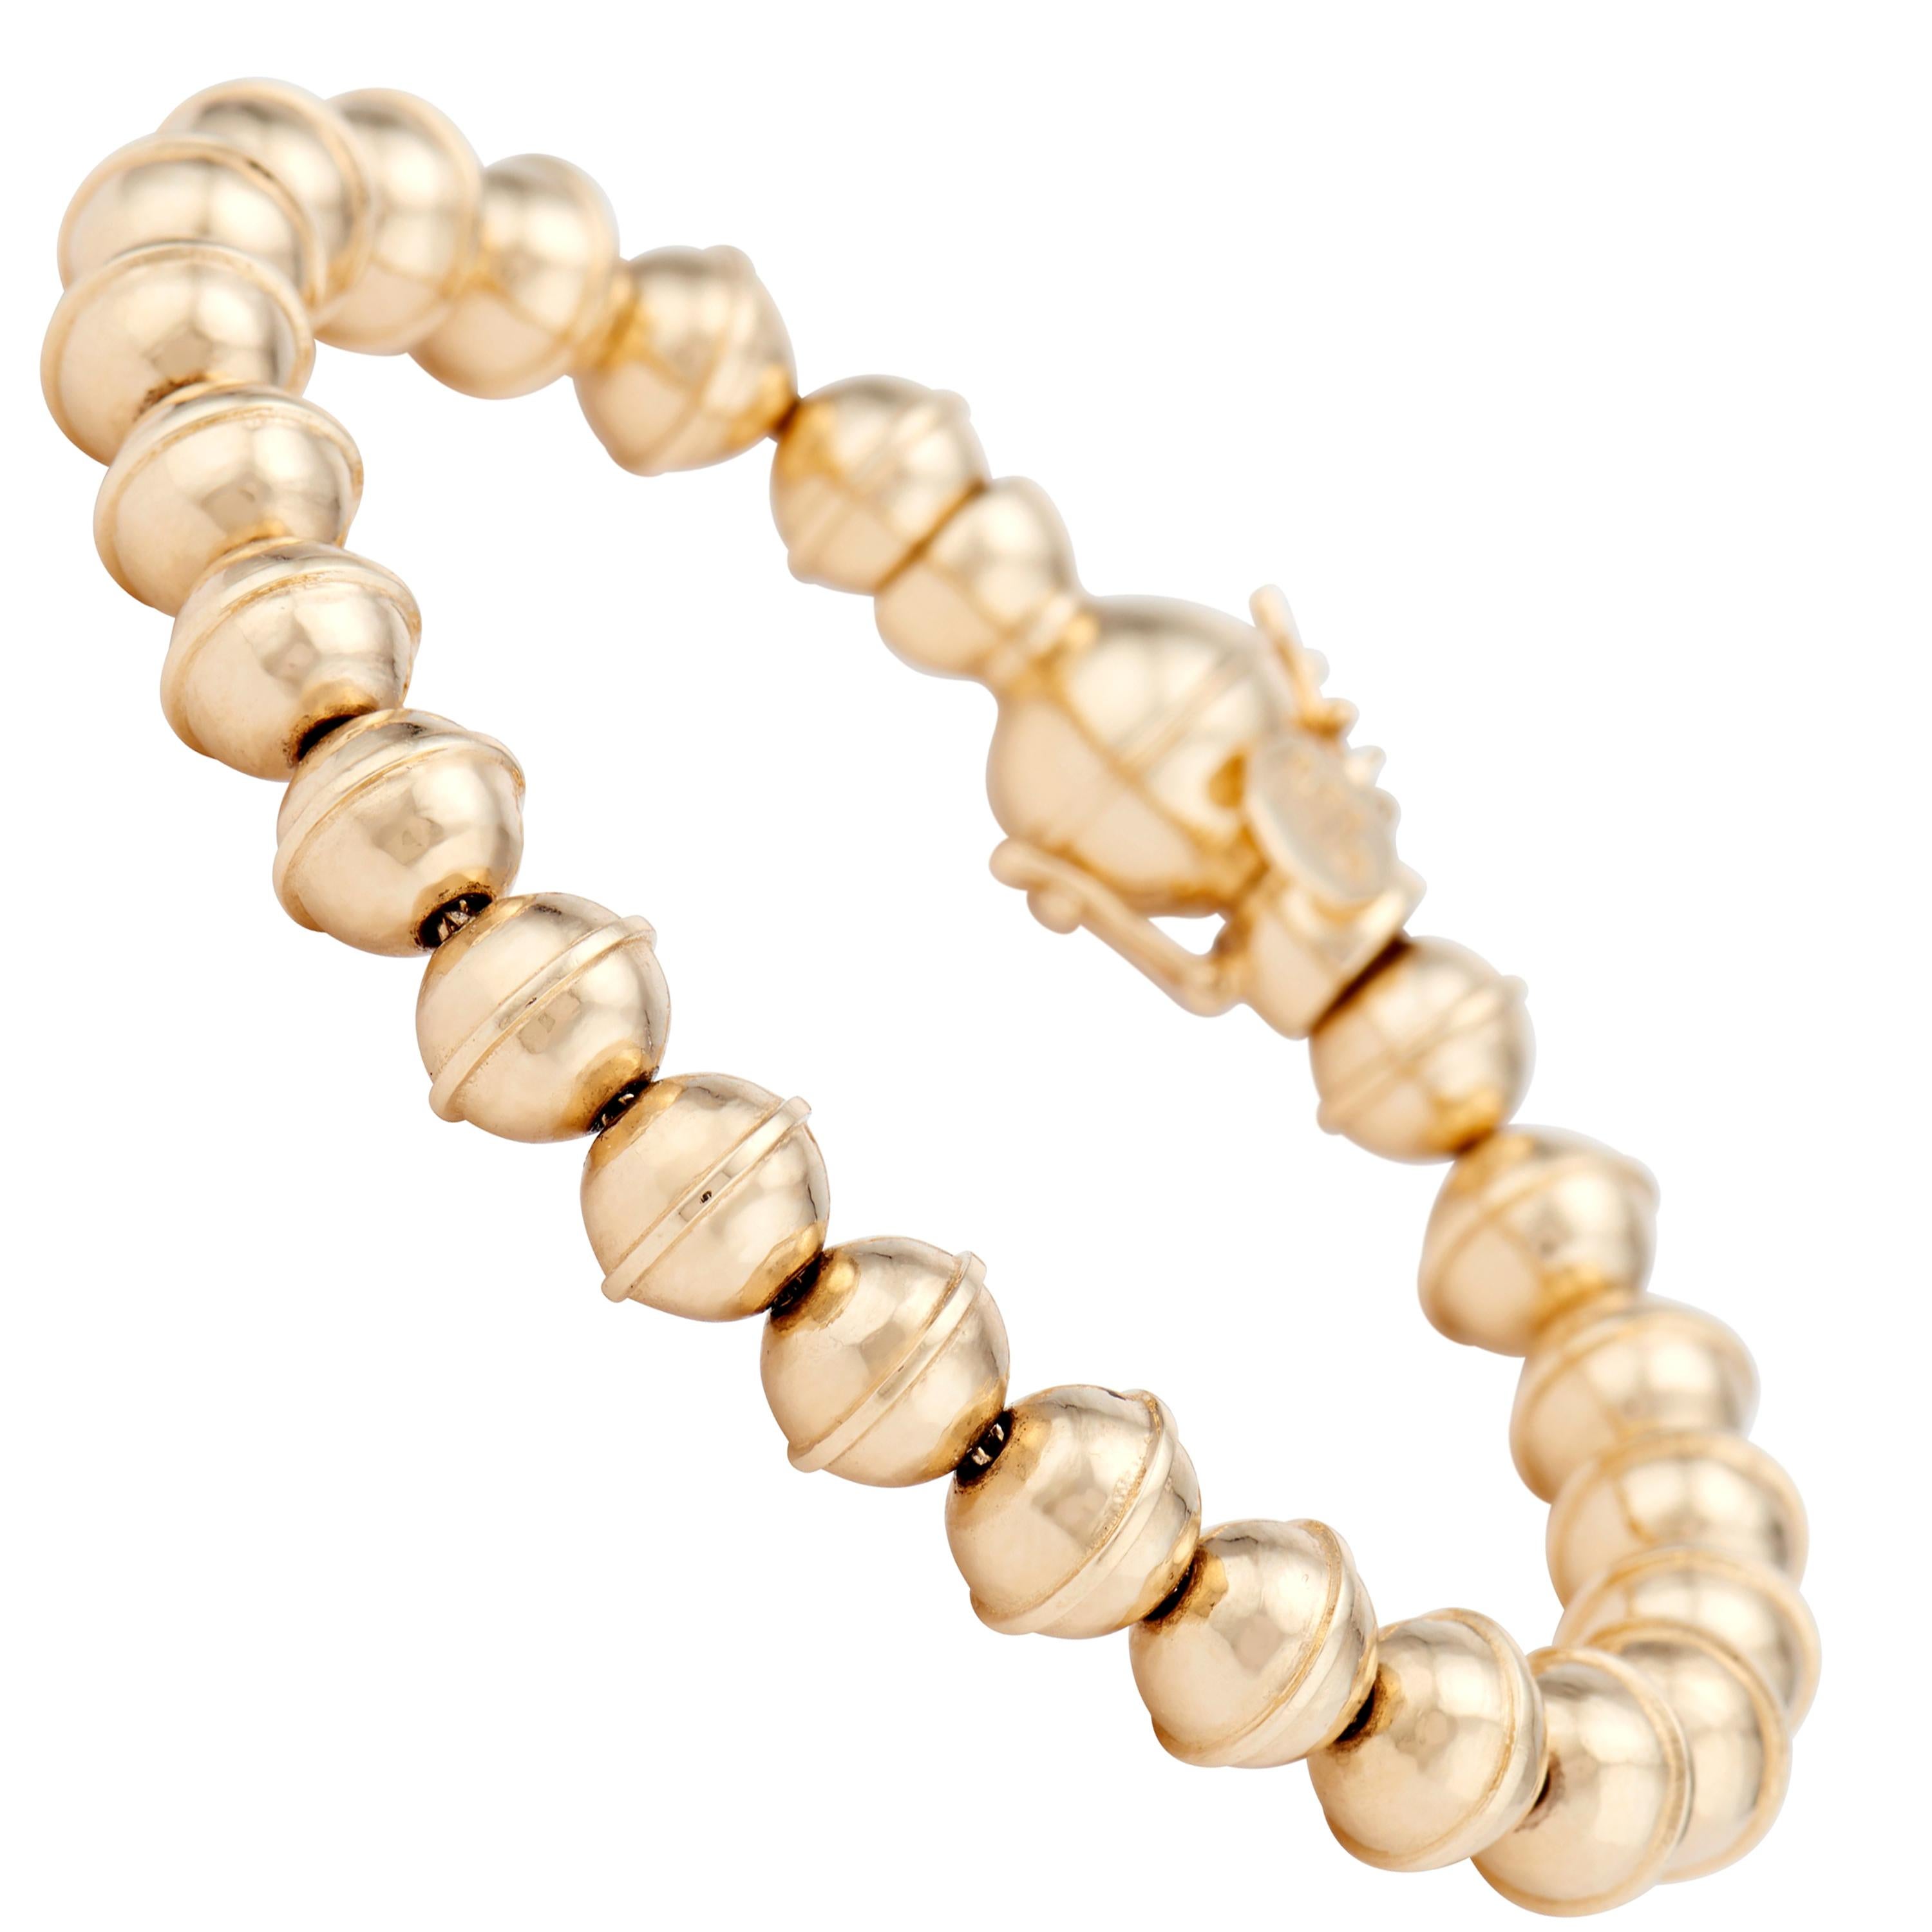 Marlo Laz 14K Yellow Gold Bead Squash Blossom Southwestern Stackable Bracelet For Sale